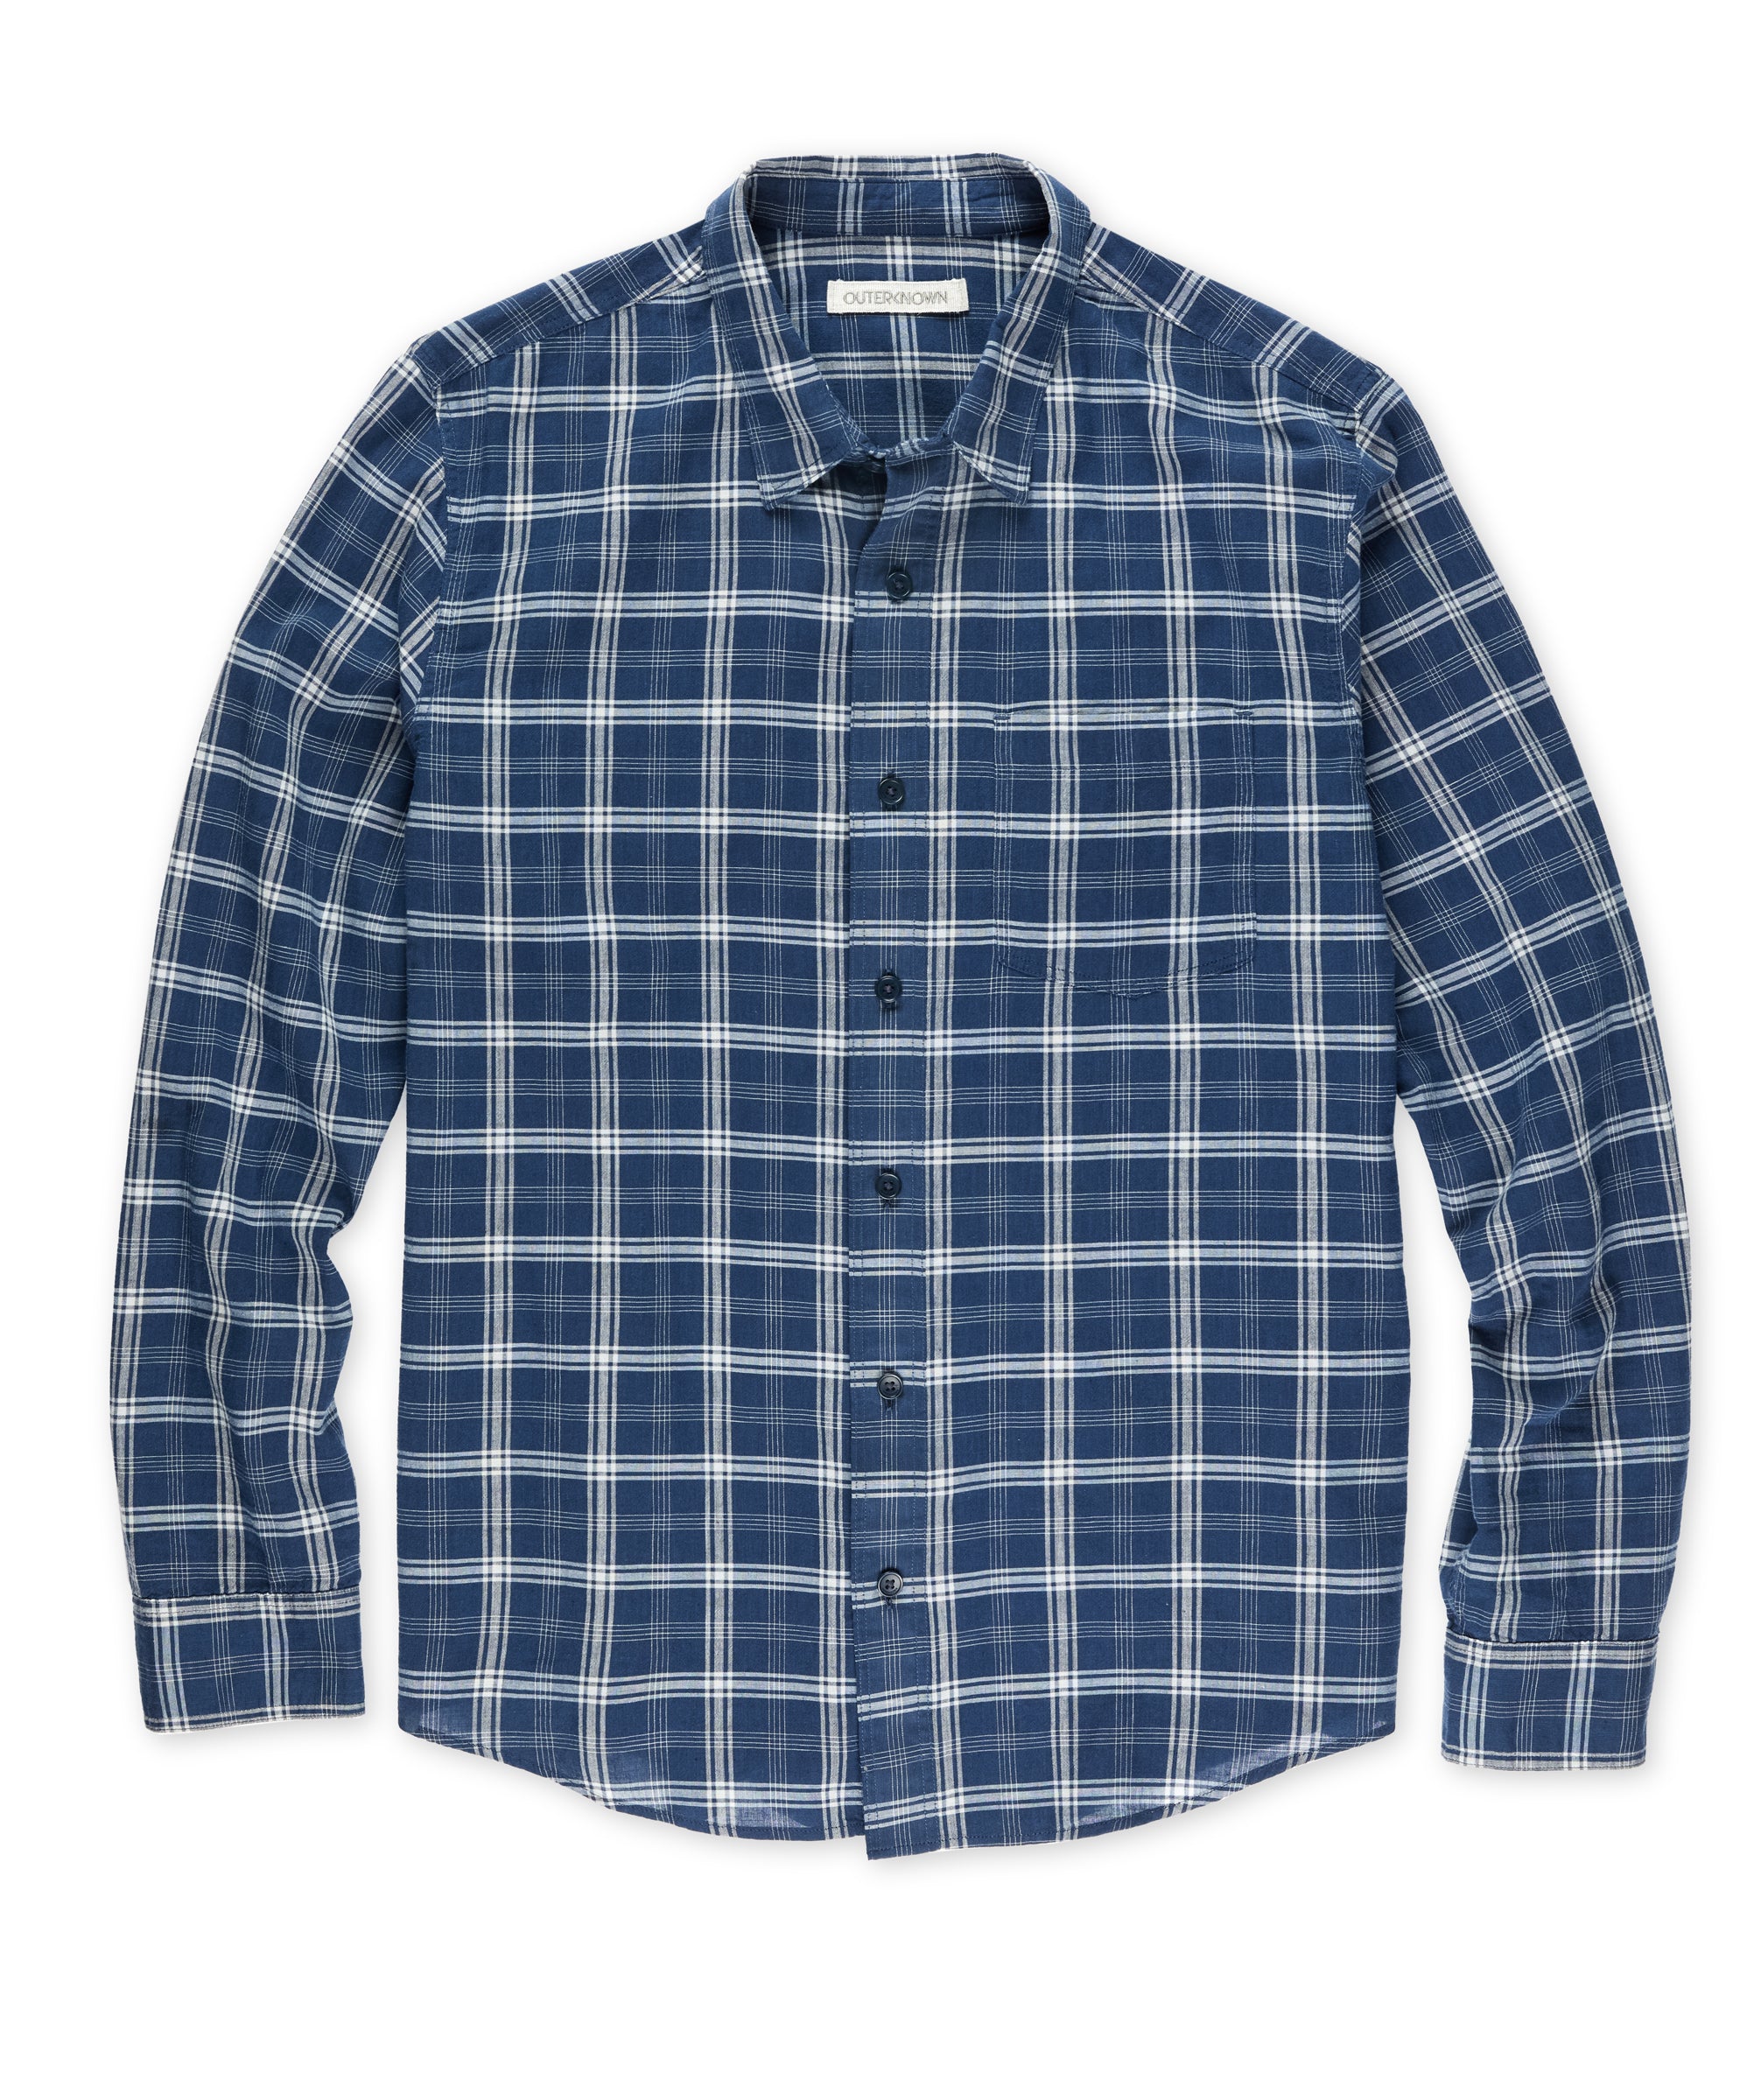 The Daytripper Shirt | Men's Shirts | Outerknown